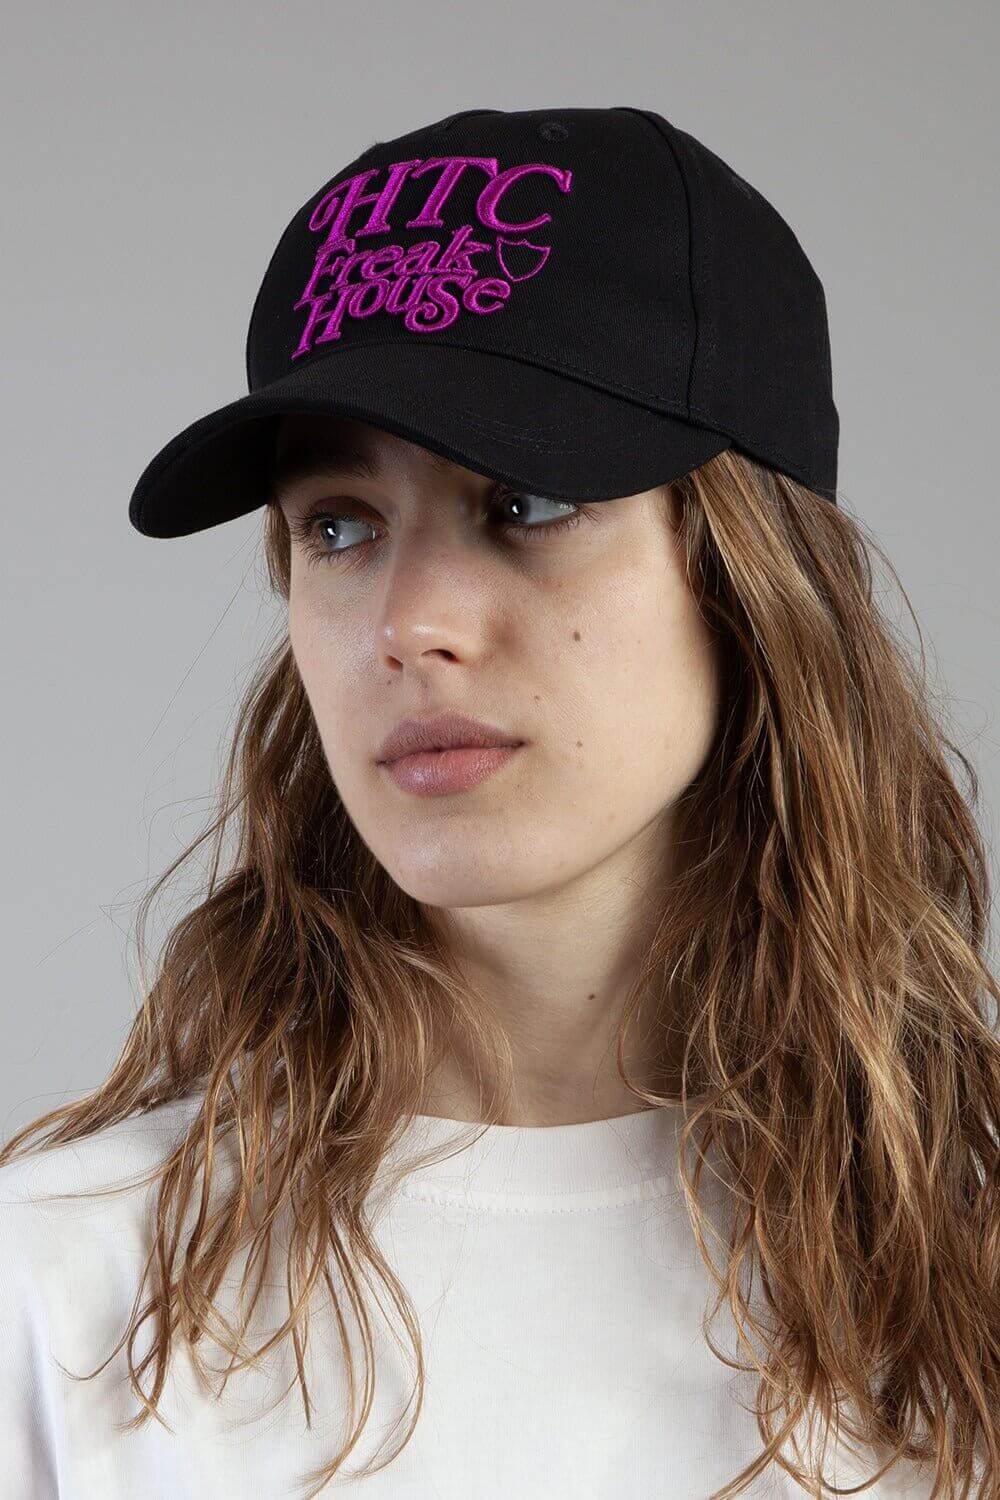 FREAK HOUSE CAP Black baseball cap , round crown with eyelets, Freak House logo embroidered on the front, adjustable strap on the back. One size fits all. 100% cotton. HTC LOS ANGELES